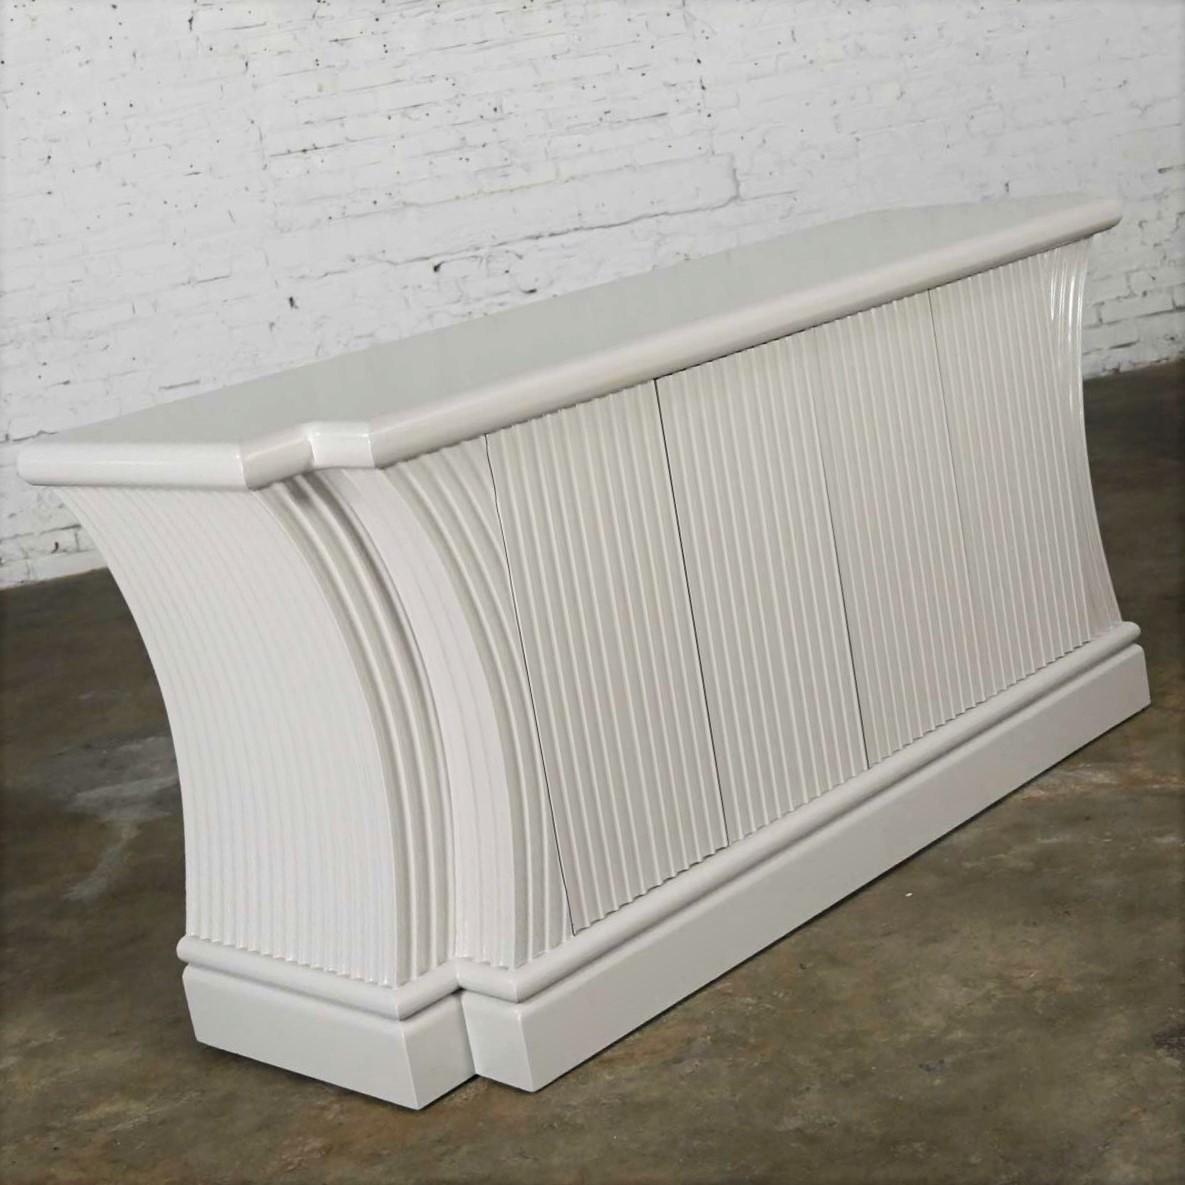 Gorgeous Art Deco Revival custom made fluted off-white/oyster gray color console cabinet buffet comprised of hardwoods, MDF, and black painted inner shelf. Beautiful condition, keeping in mind that this is vintage and not new so will have signs of